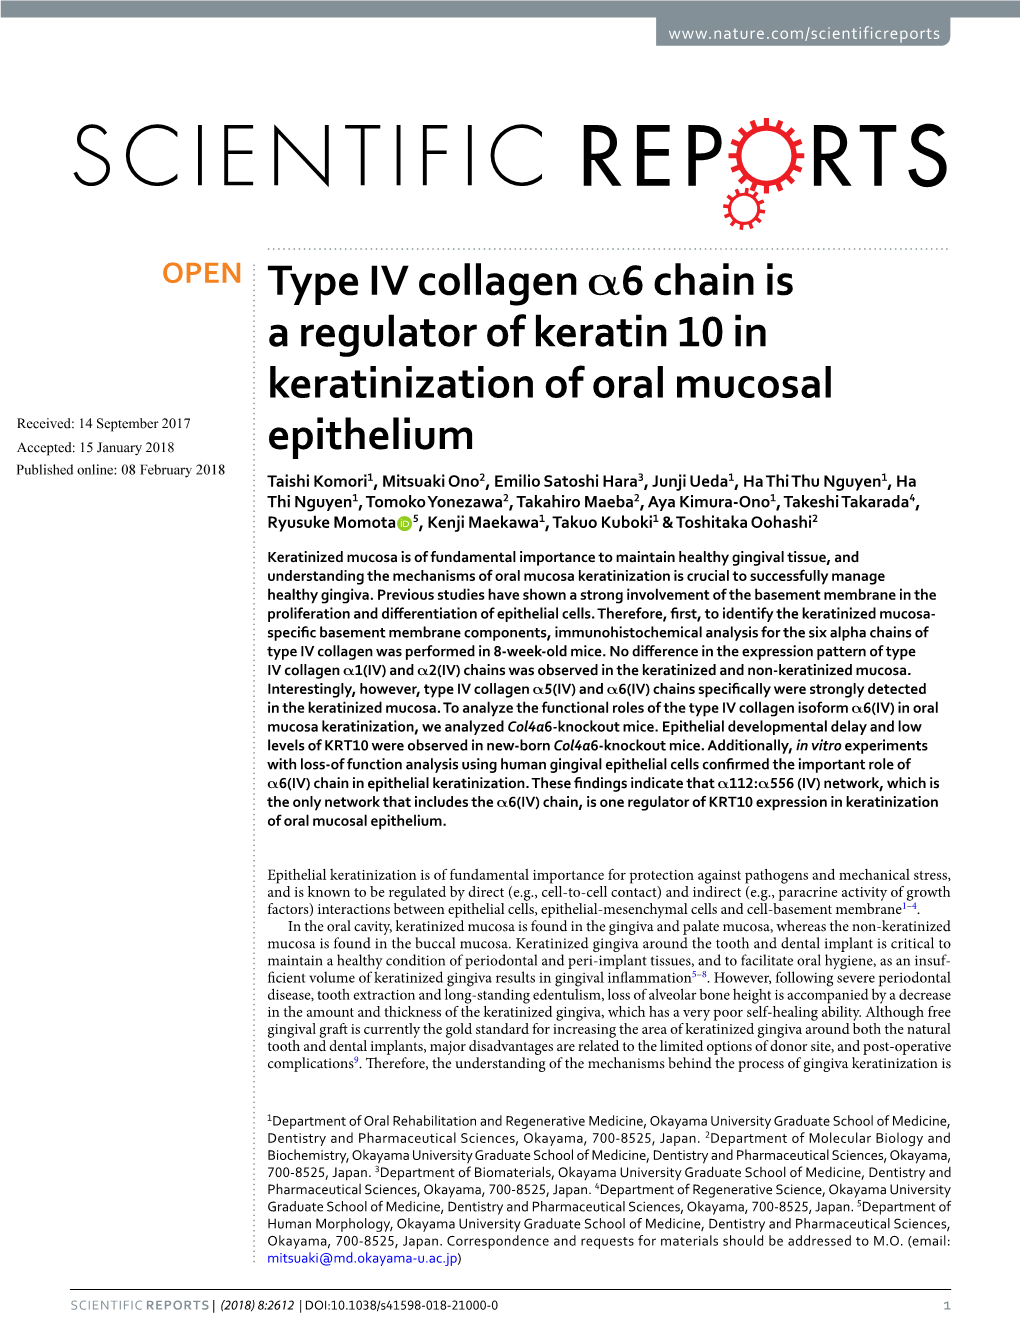 Type IV Collagen Α6 Chain Is a Regulator of Keratin 10 In